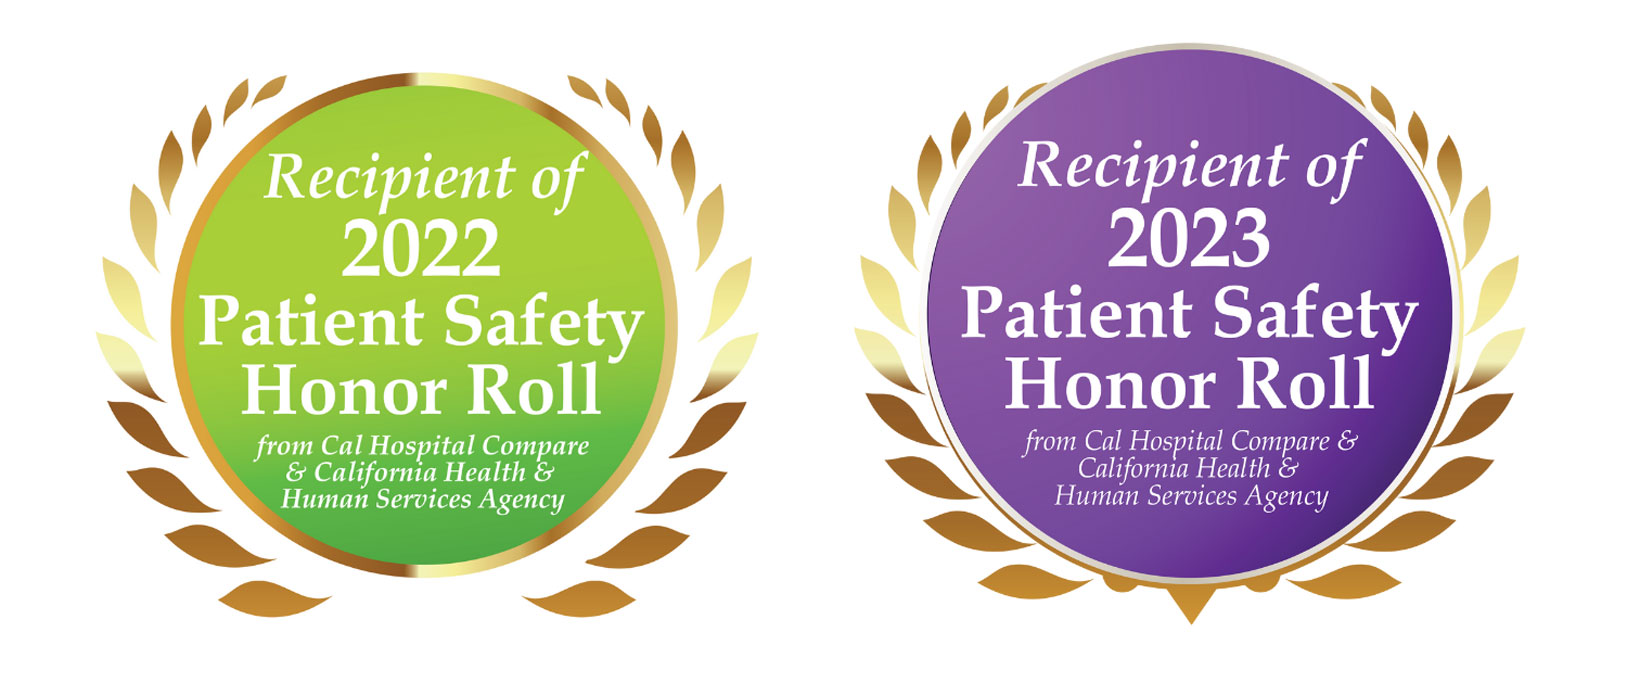 Recipient of 2022 Patient Safety Honor Roll
from Cal Hospital Compare and California Health & Human Services Agency

Recipient of 2023 Patient Safety Honor Roll
from Cal Hospital Compare & California Health & Human Services Agency